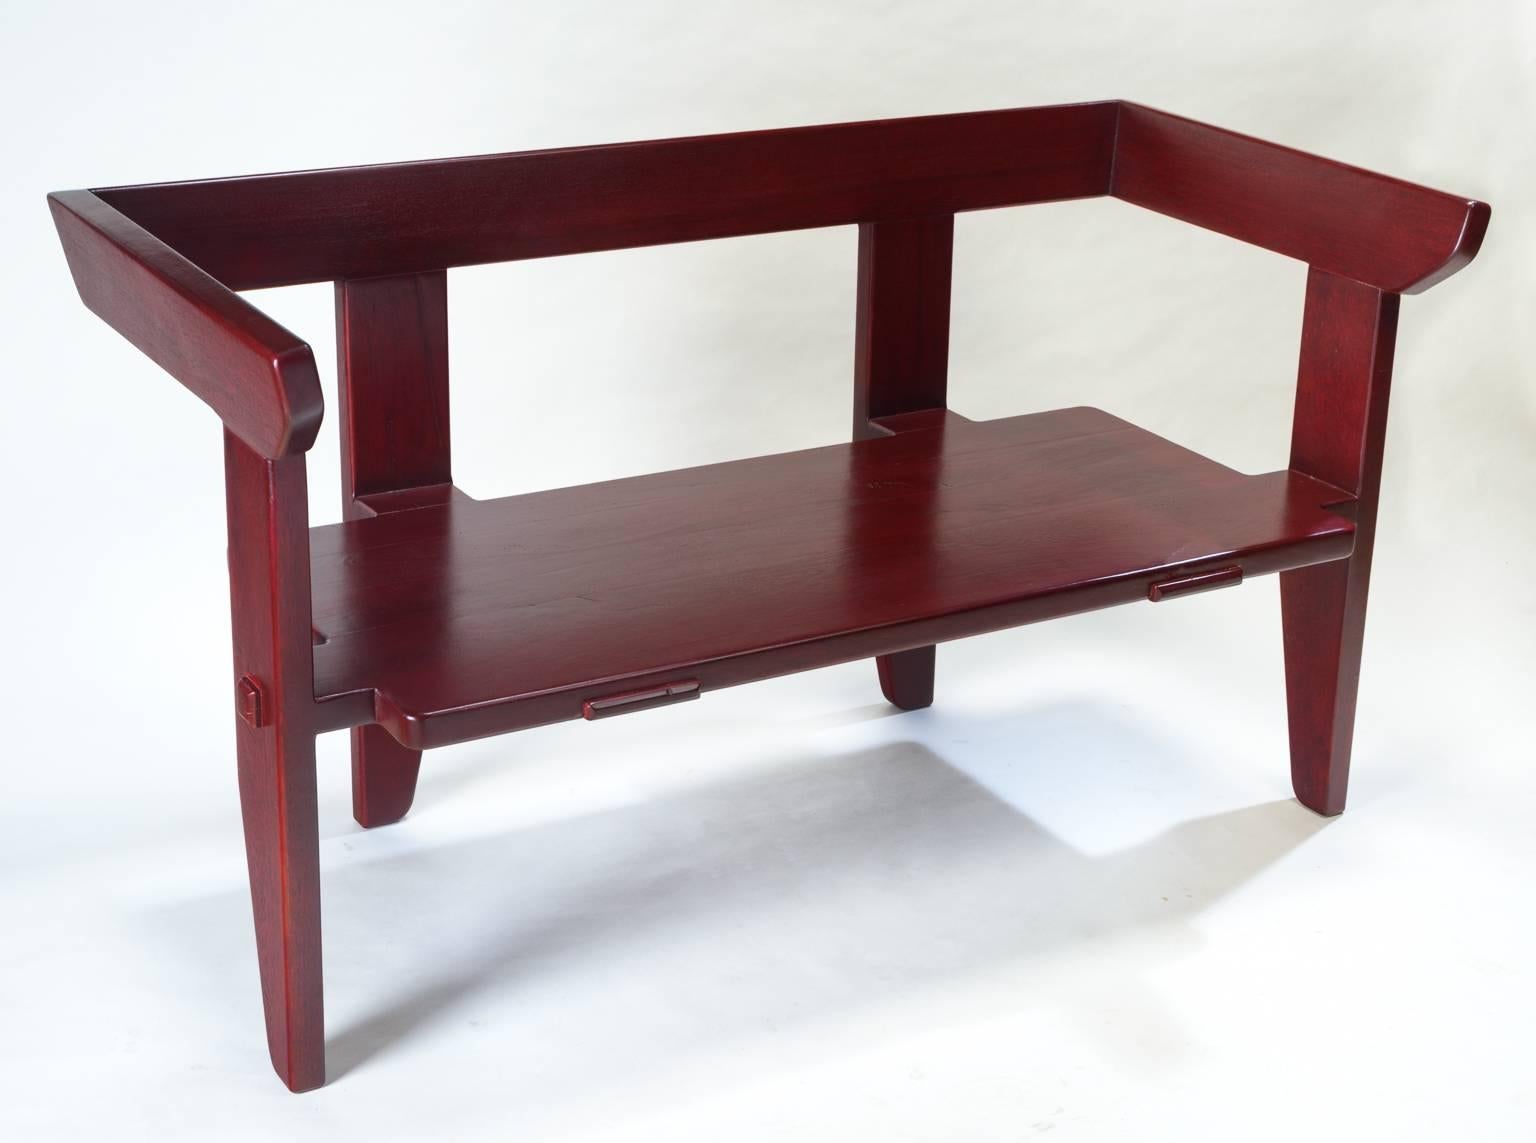 Mexican Laredo Bench Contemporary Design Traditional Joinery, Hardwood w/ Lacquer Finish For Sale